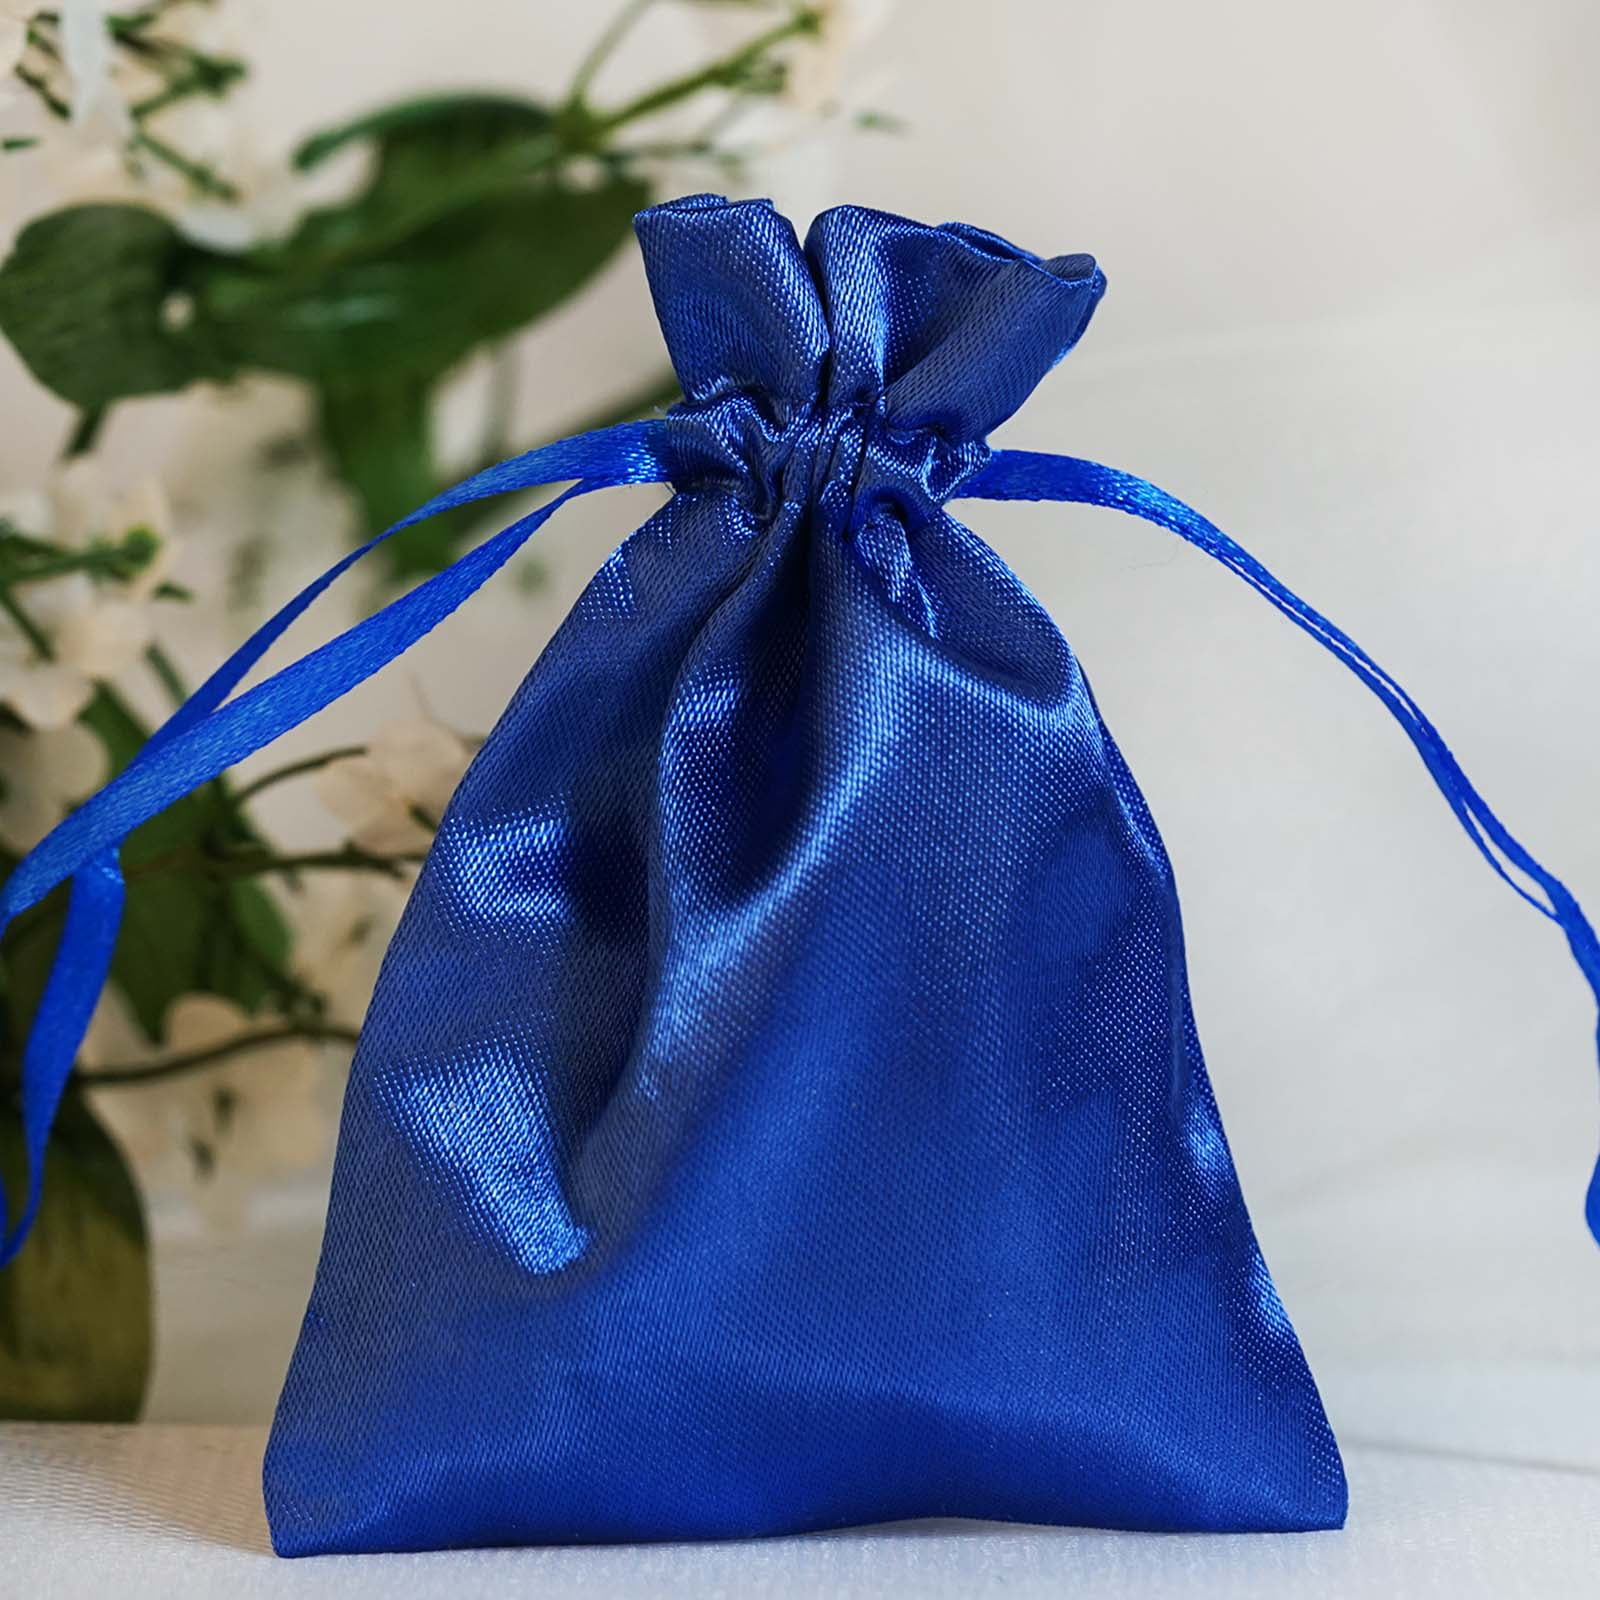 Details about   10pcs Velvet Jewelry Bag Wedding Party Favor Gift Bag Drawstring Pouch Storage 